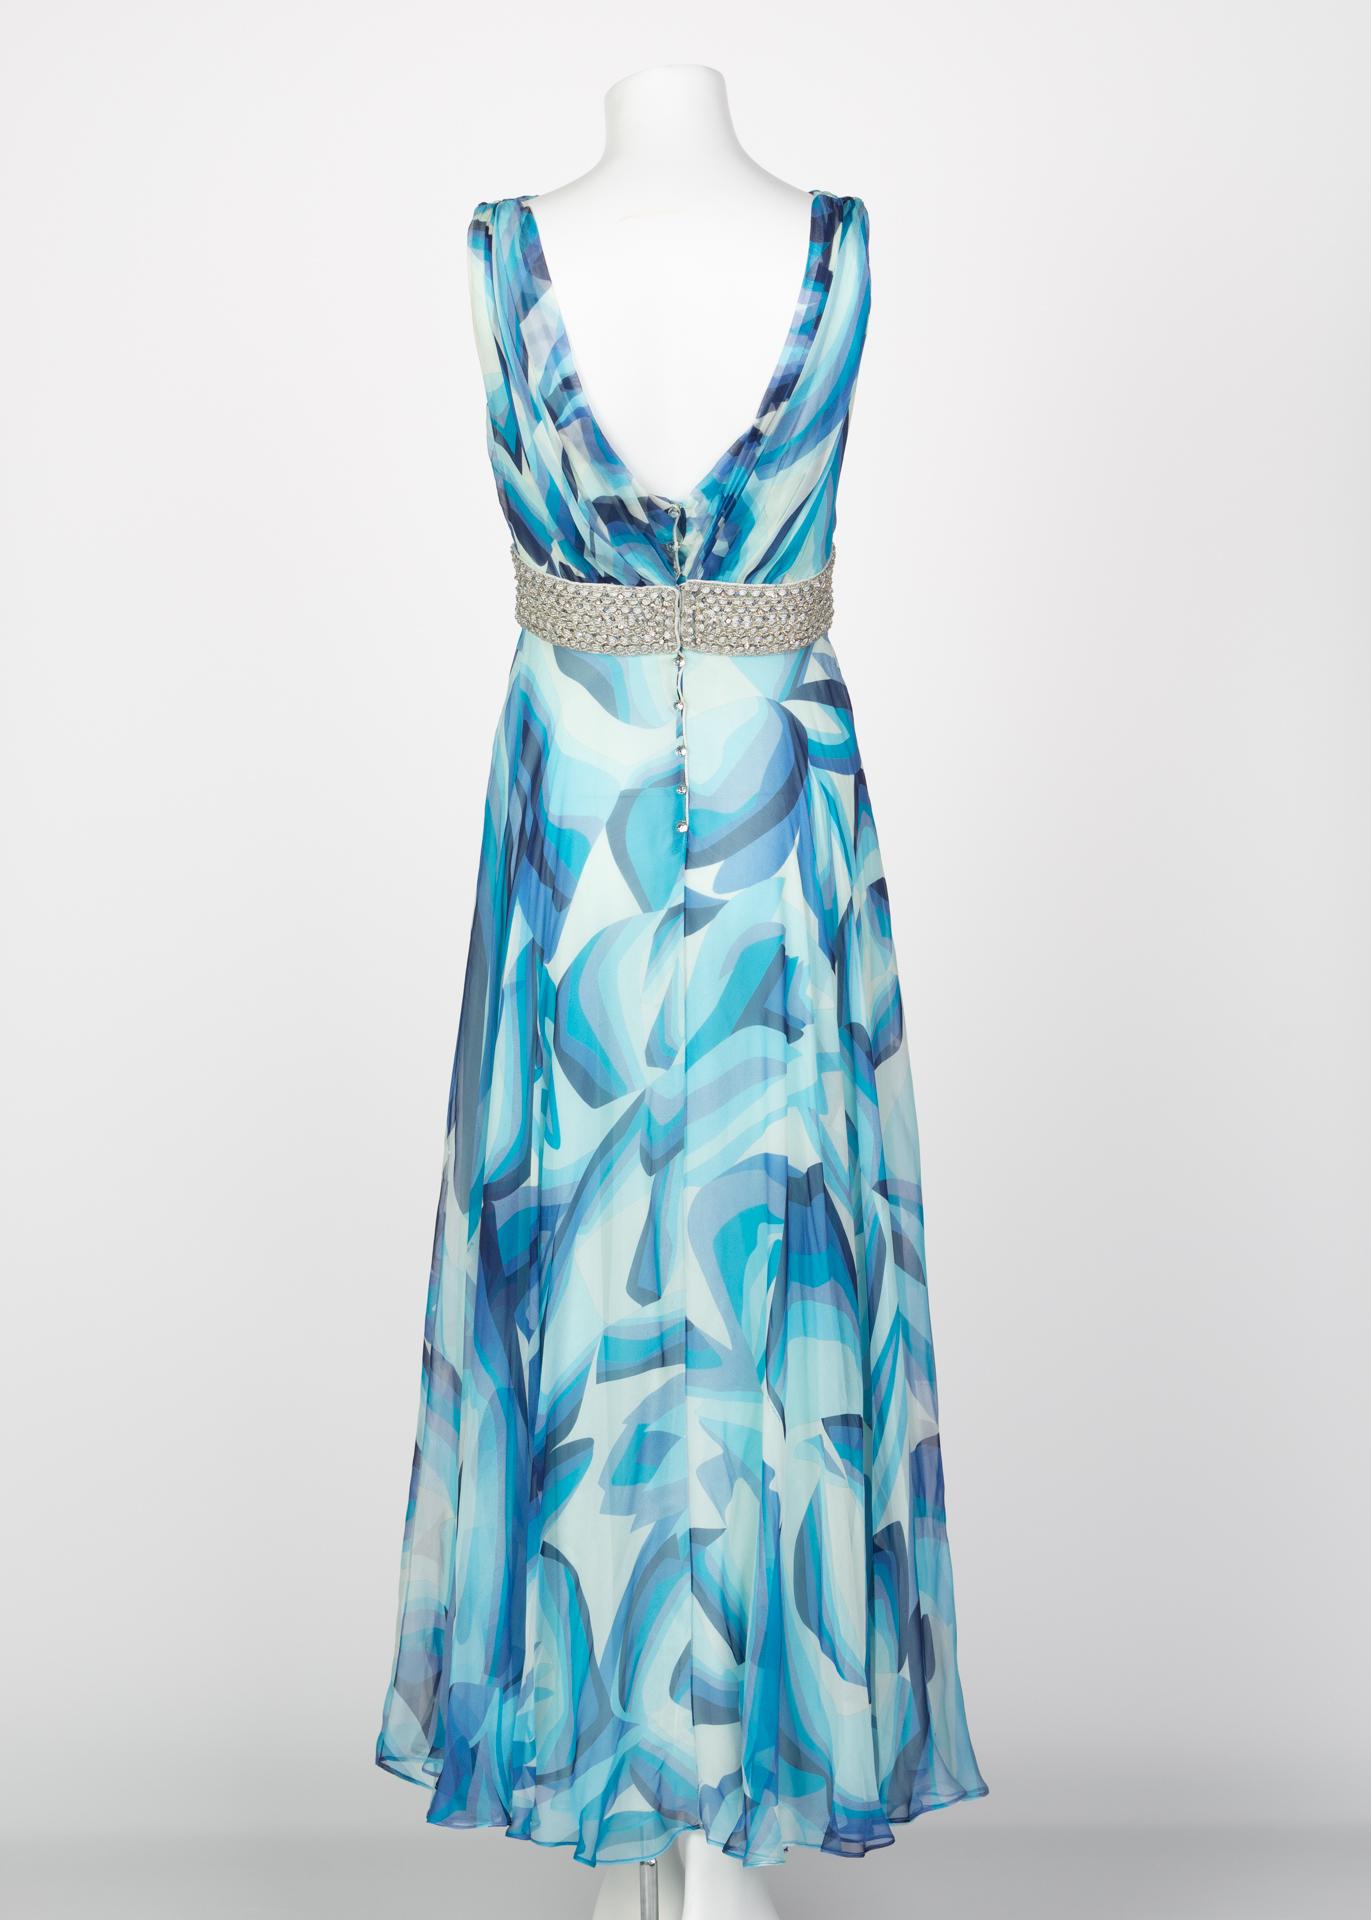 Missoni Blue Printed Plunge Neck Sleeveless Silk Crystal Gown, 2006 1